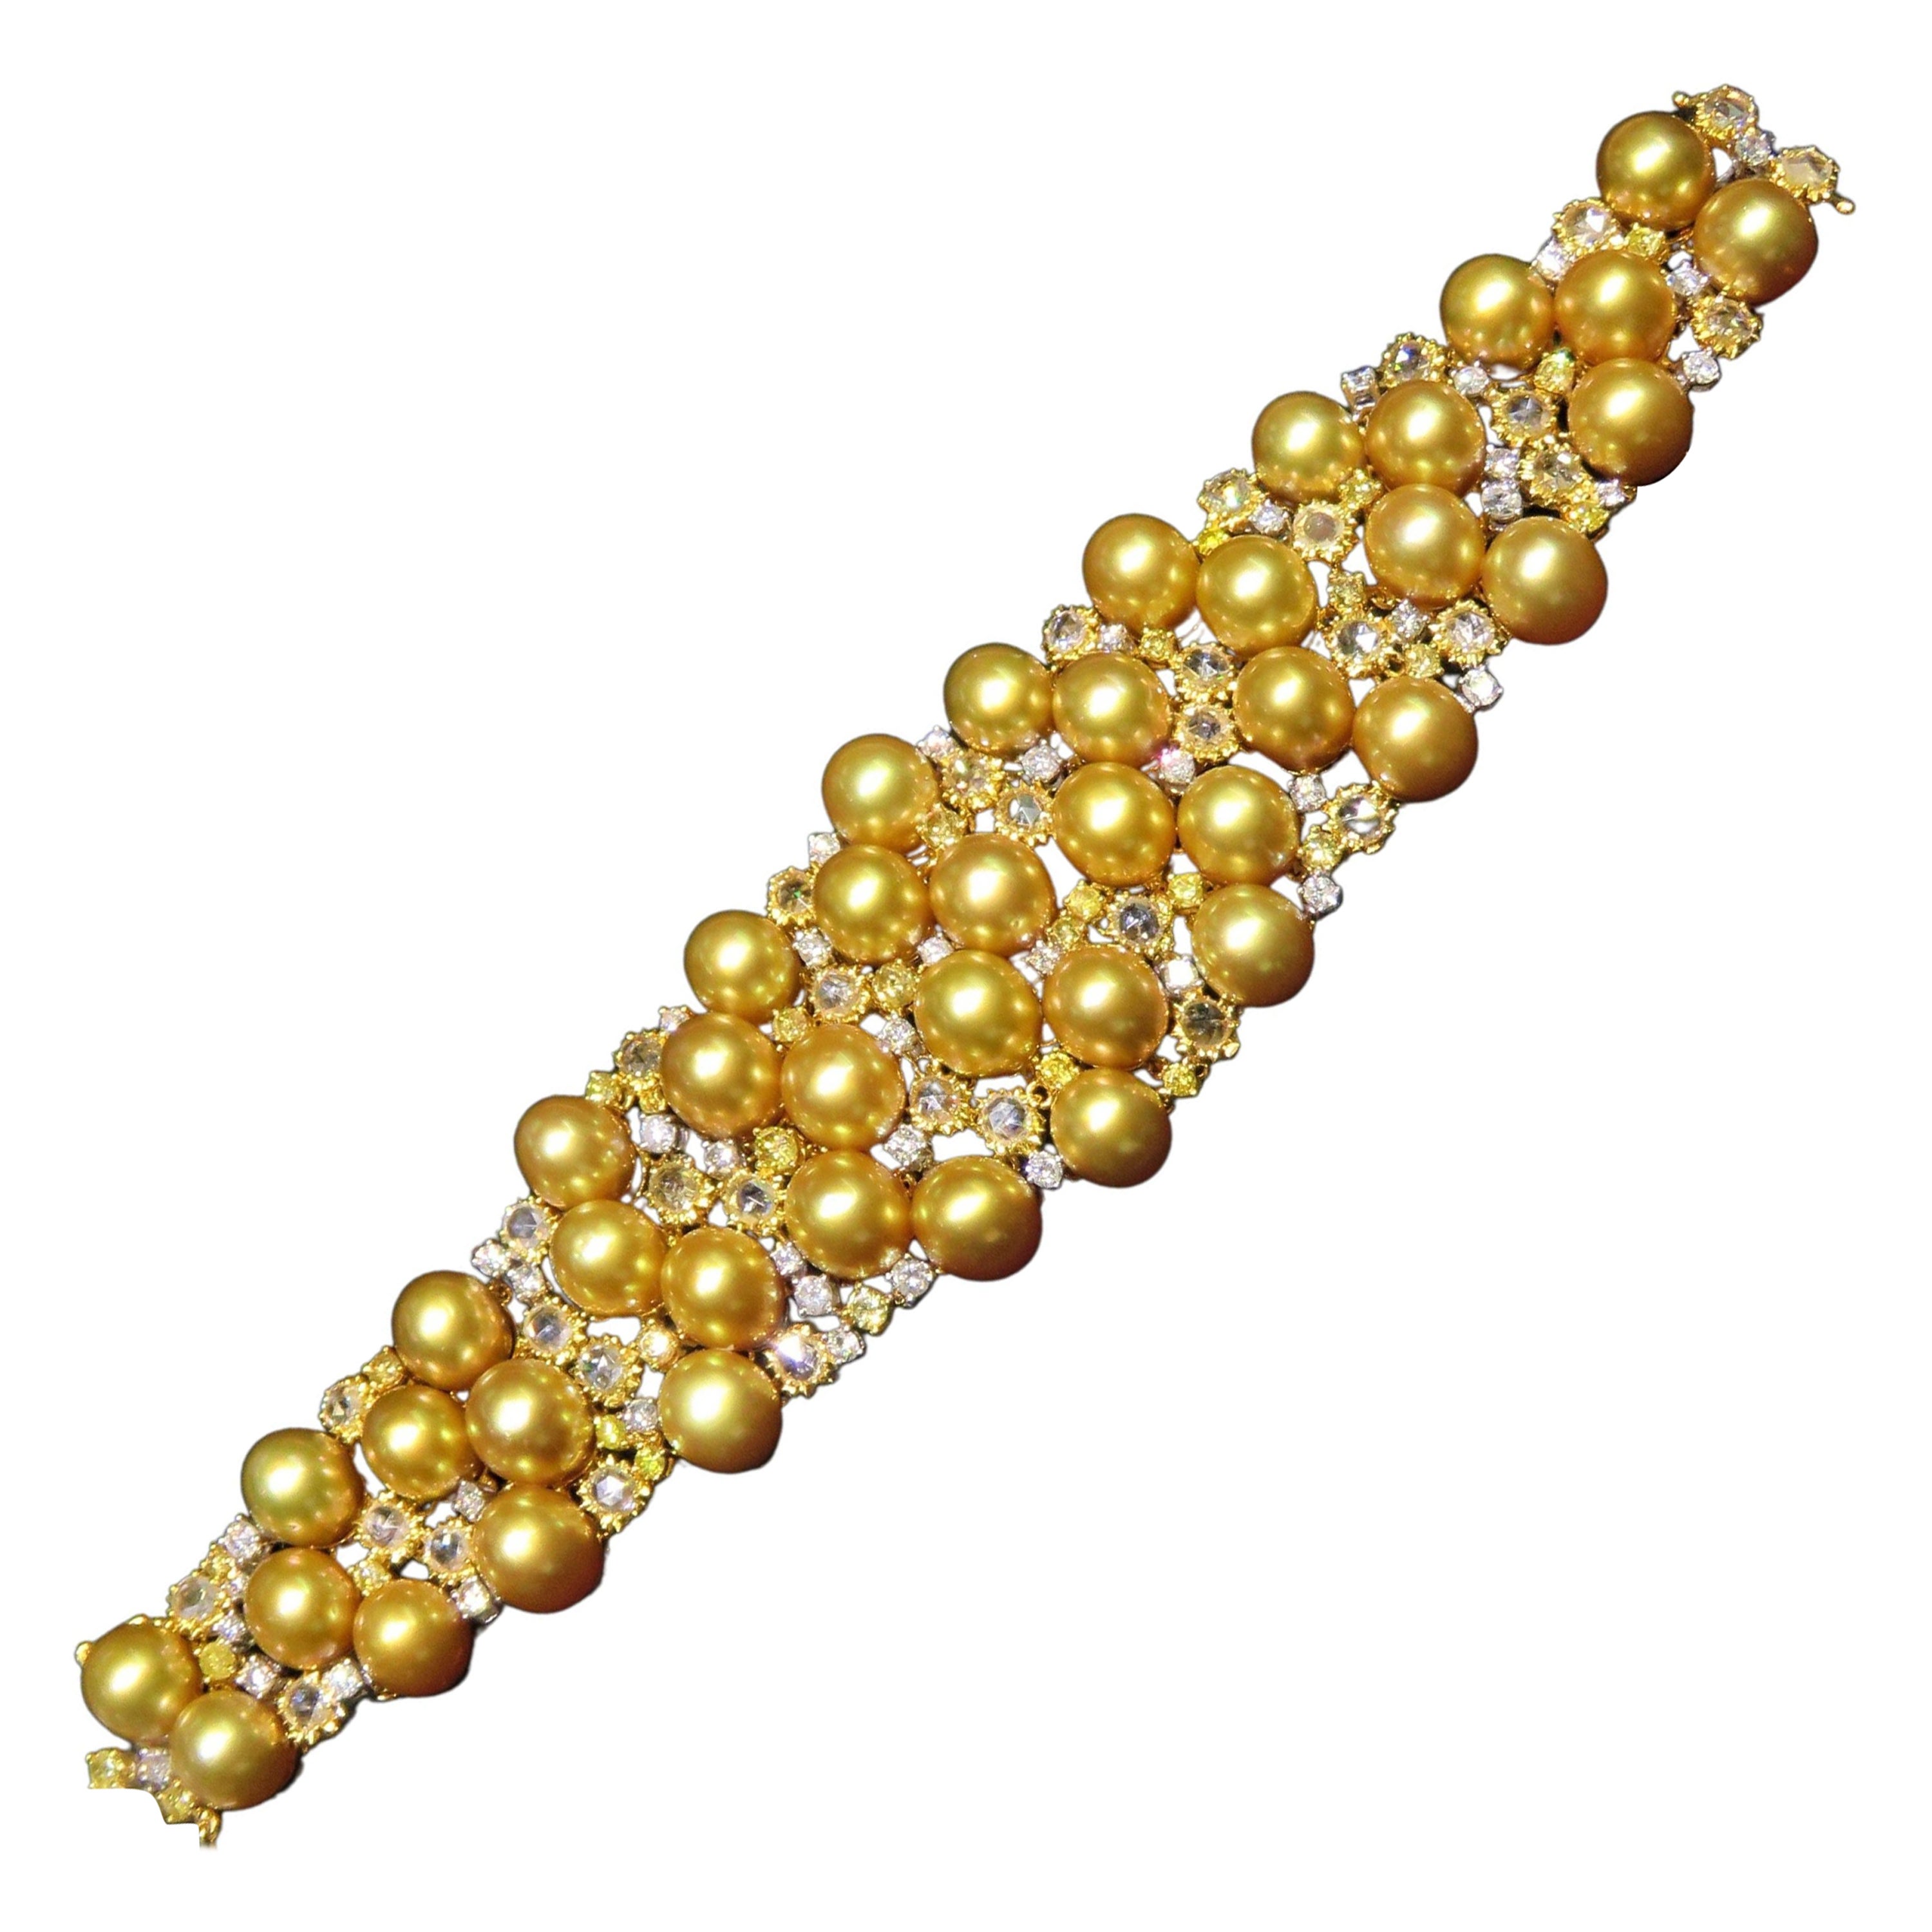 NWT 73, 600 Gorgeous 18kt South Sea Gold Pearl Rose Cut Yellow Diamond Bracelet For Sale